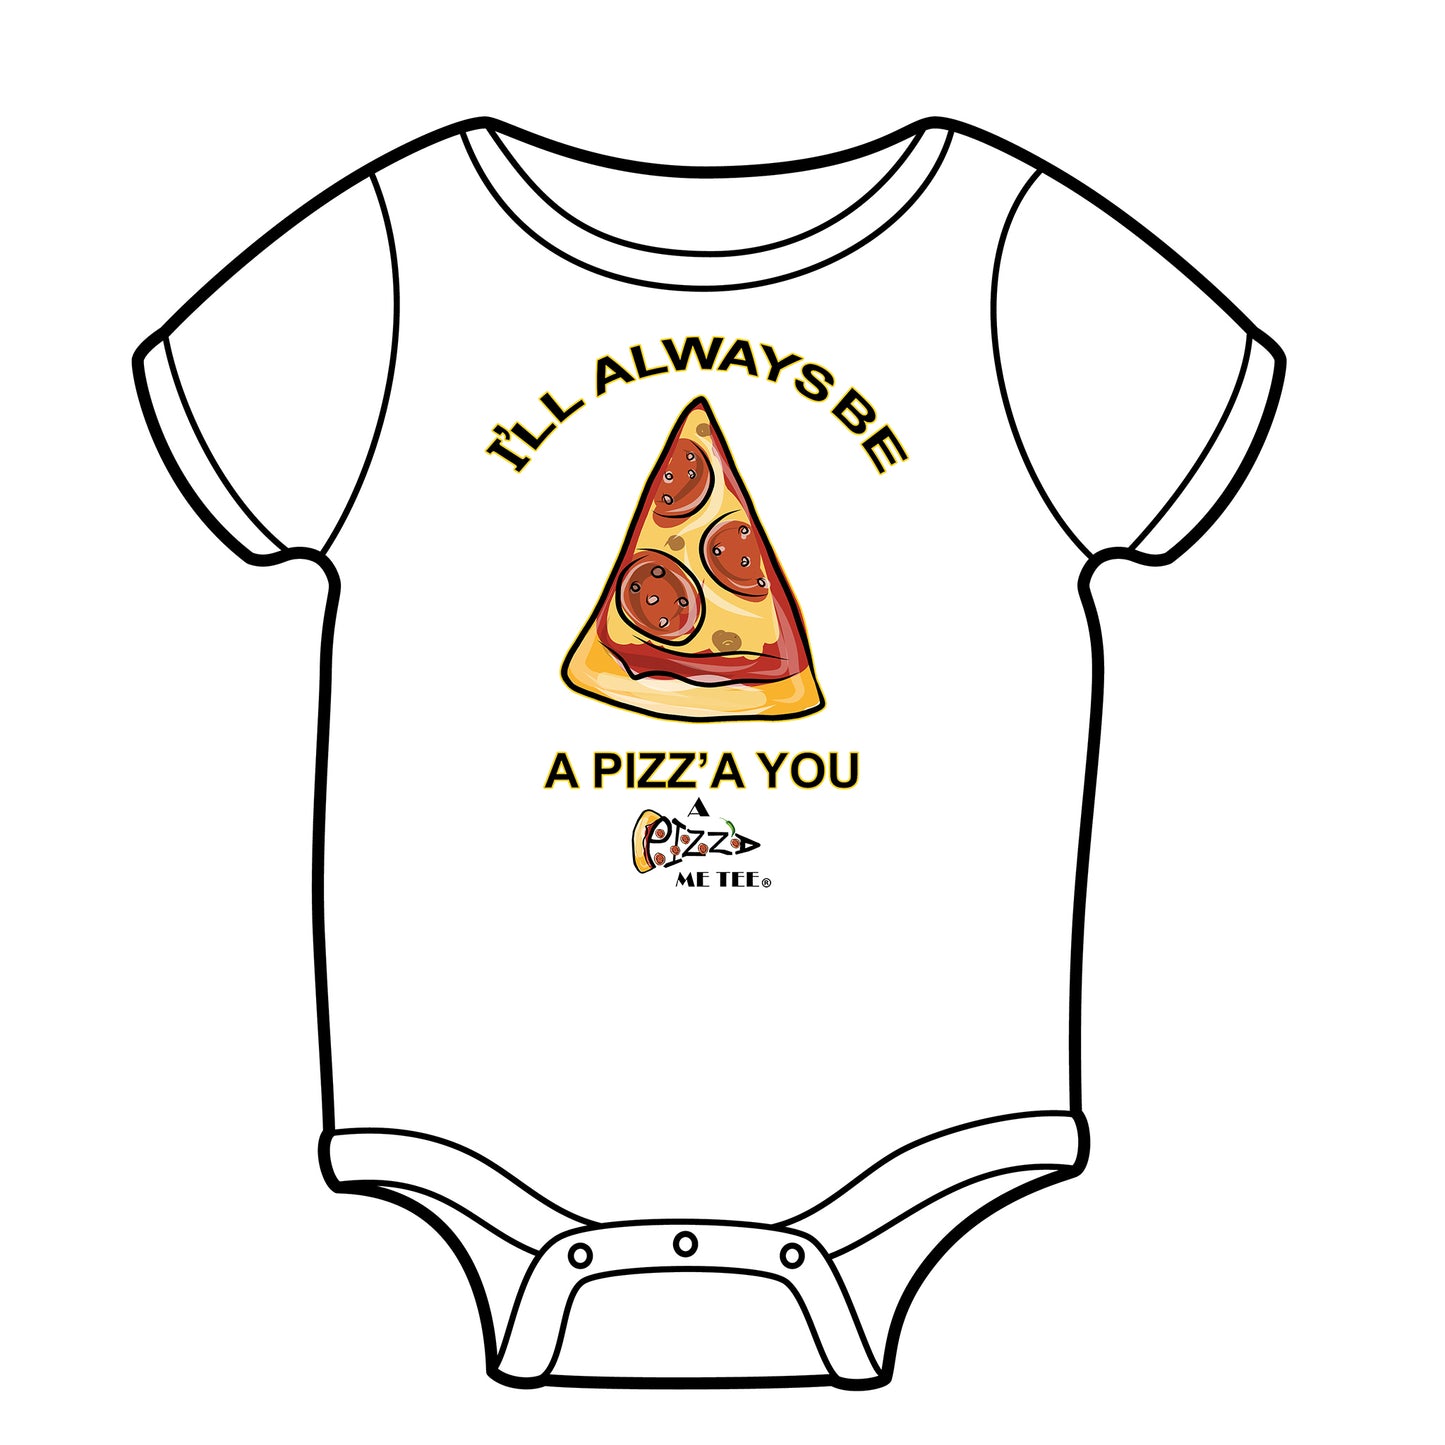 I'LL ALWAYS BE A PIZZA OF YOU - FAMILY SLICE WHITE